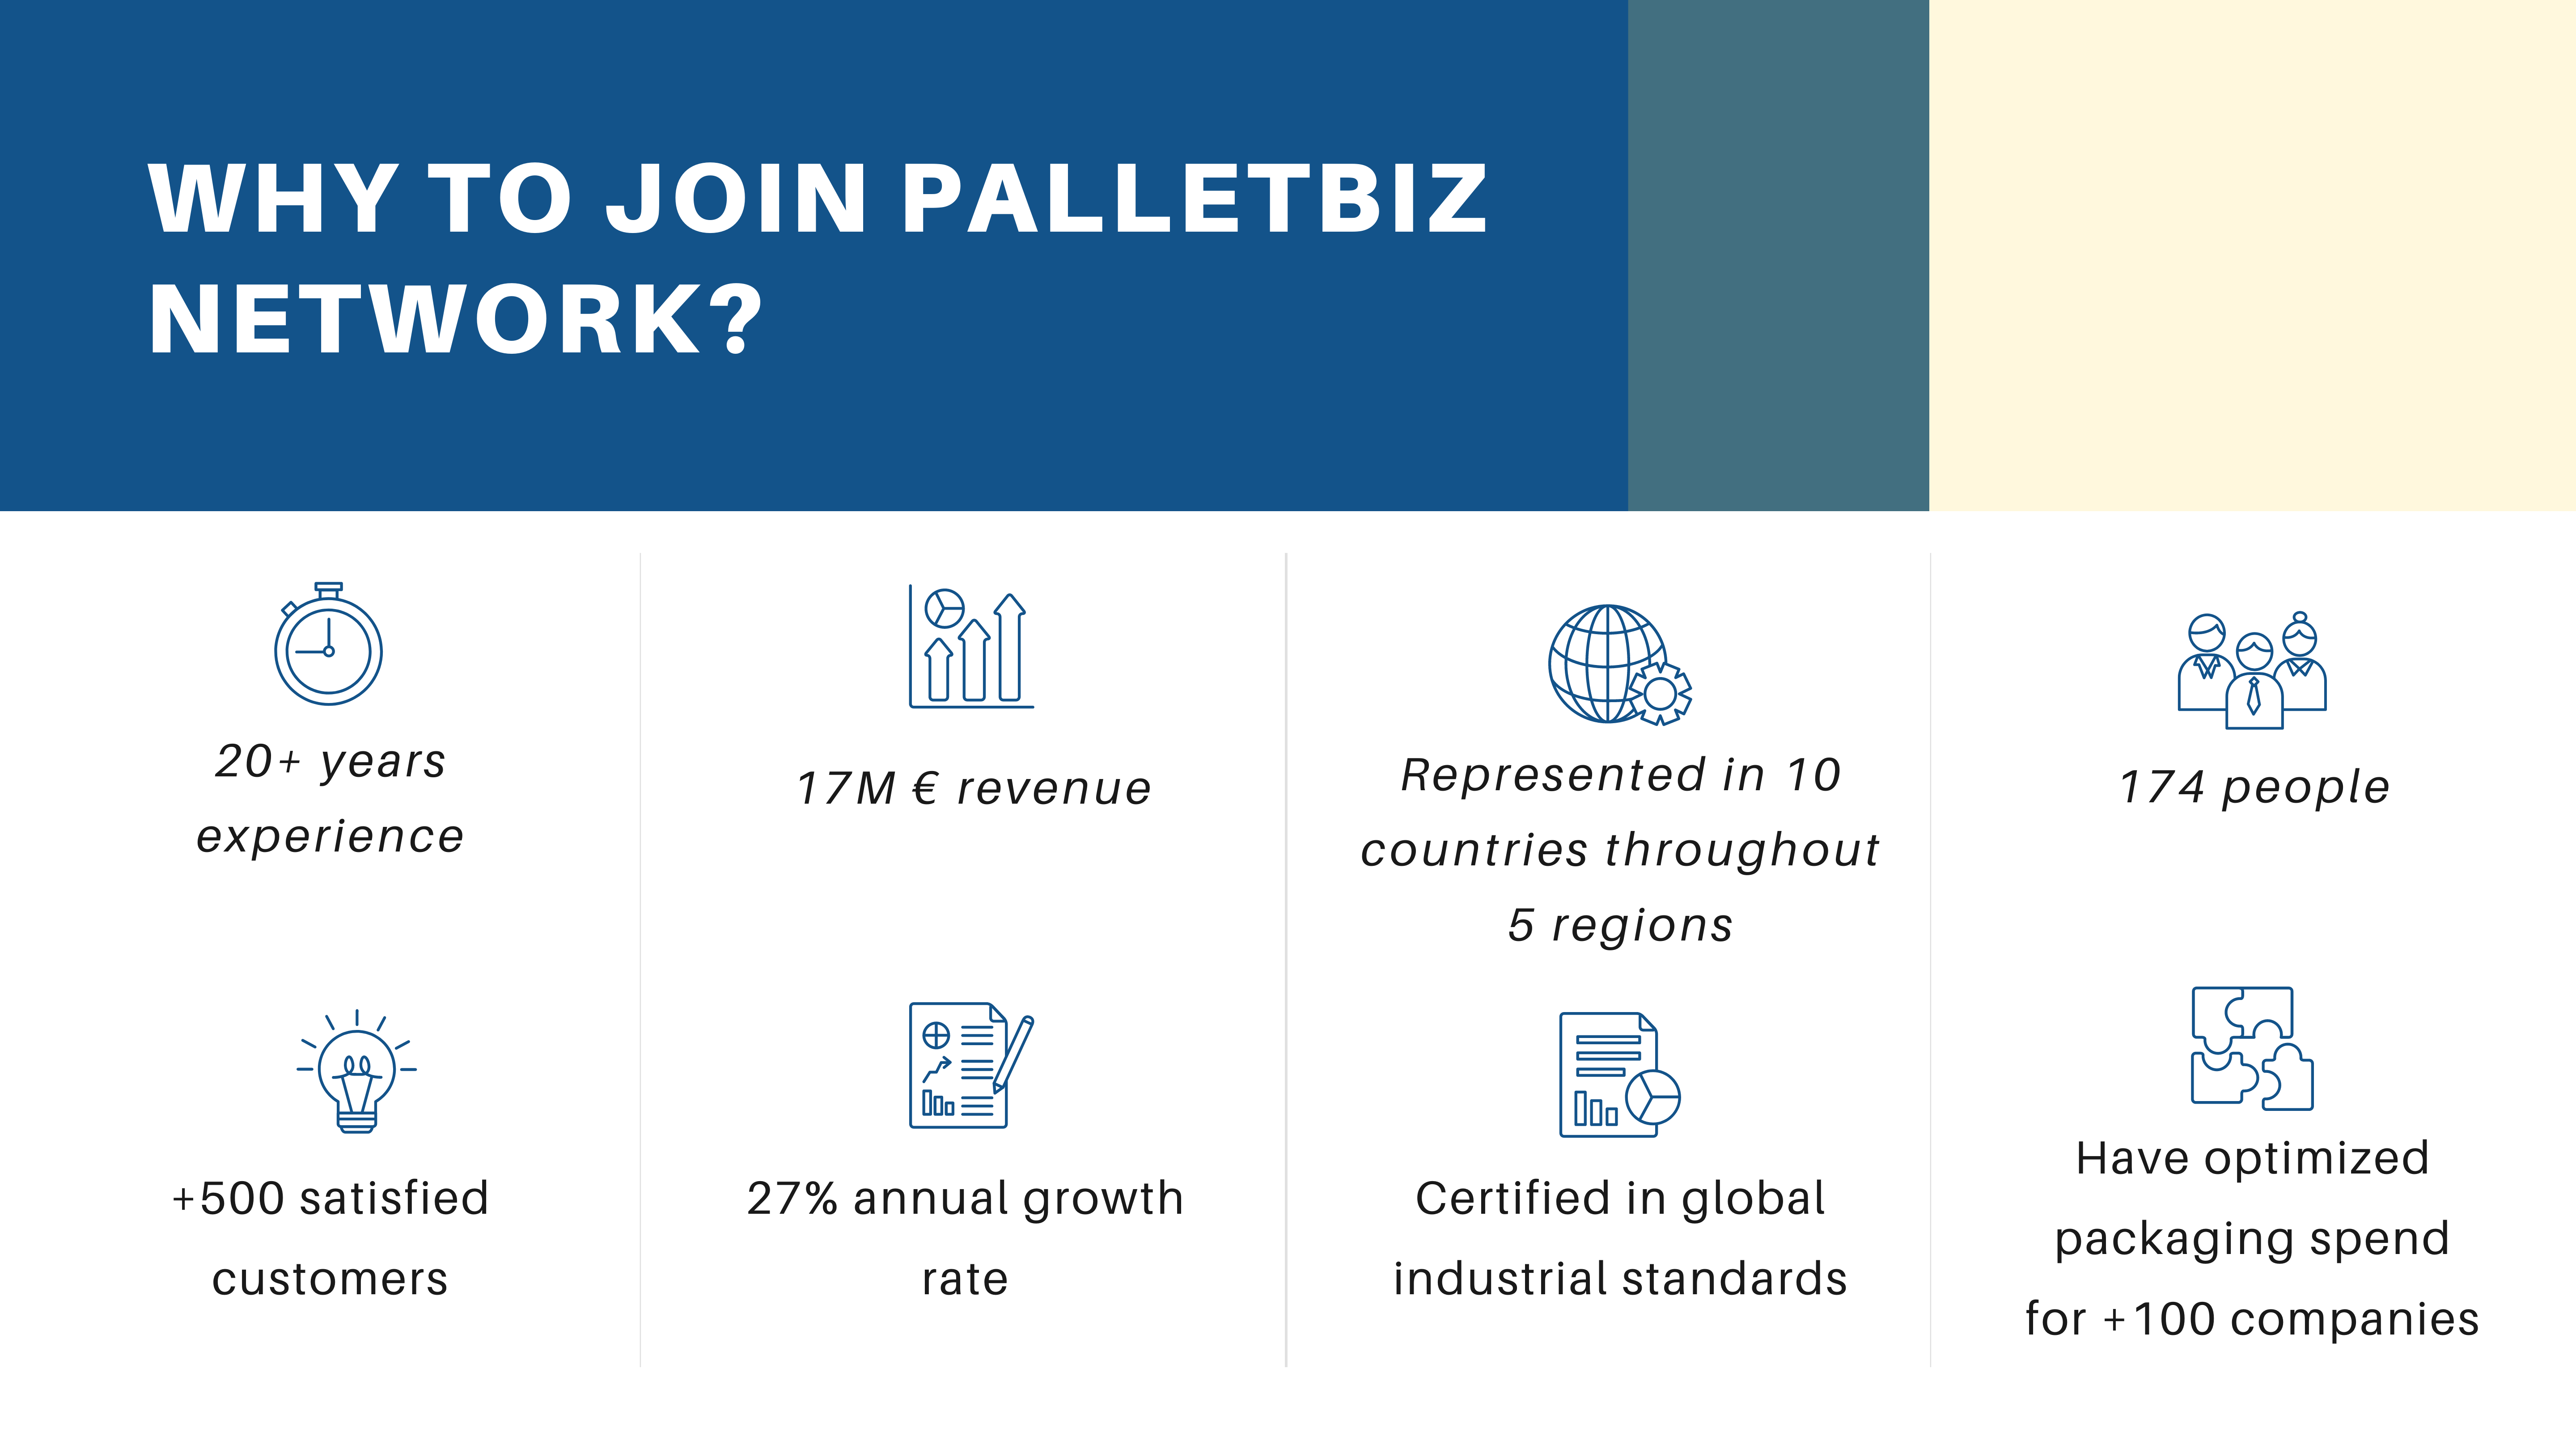 Why to join PalletBiz?